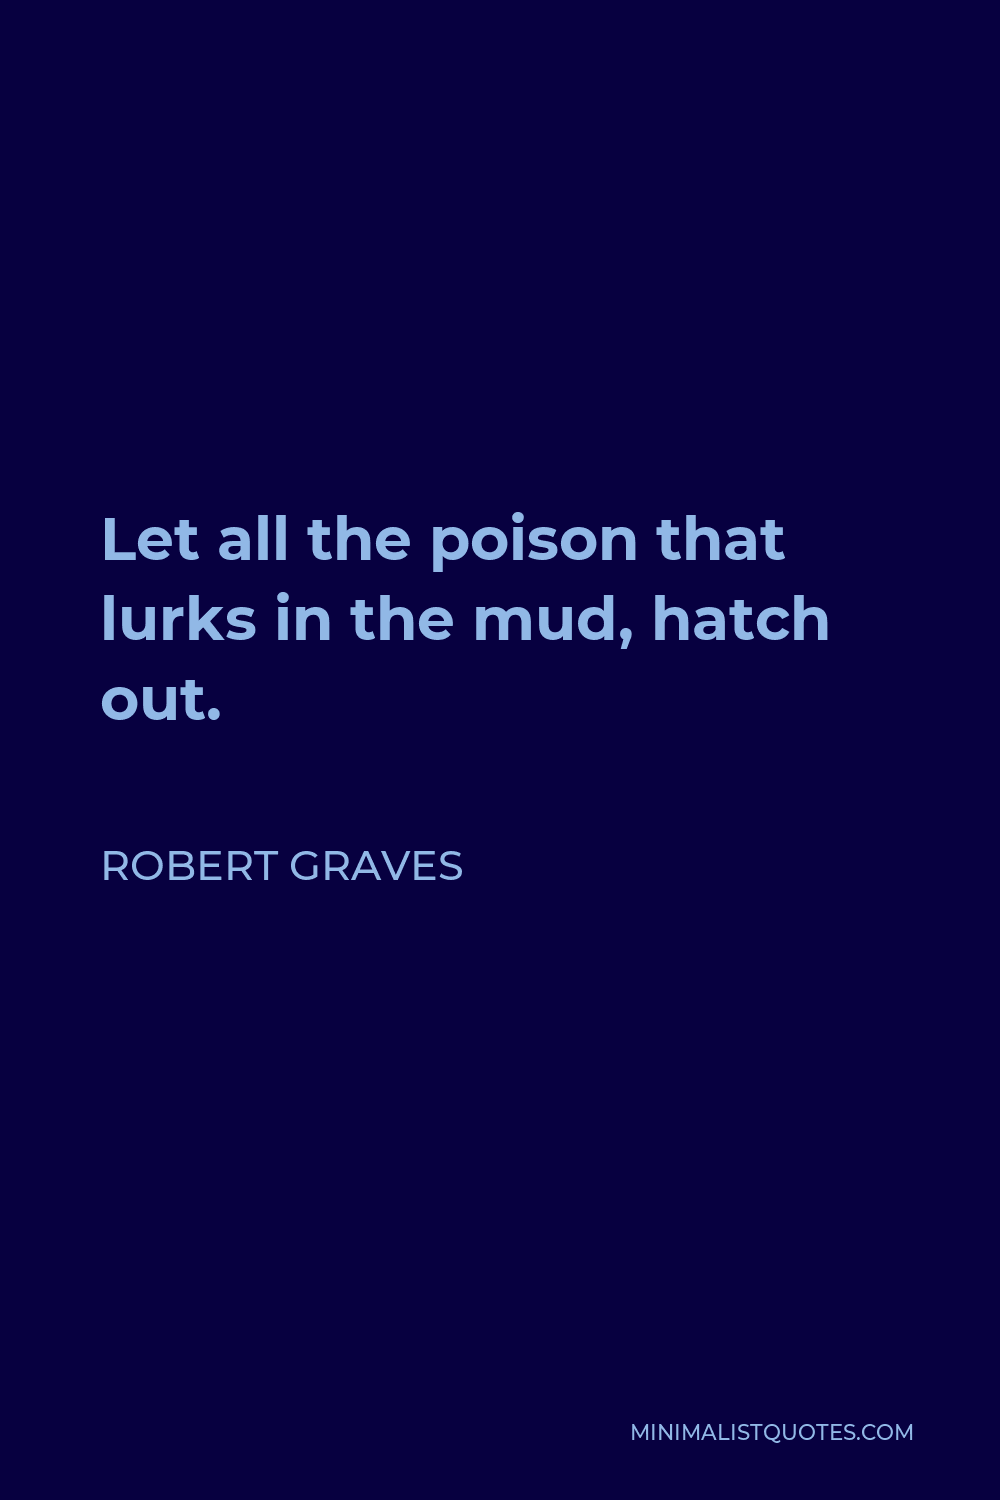 Robert Graves Quote - Let all the poison that lurks in the mud, hatch out.